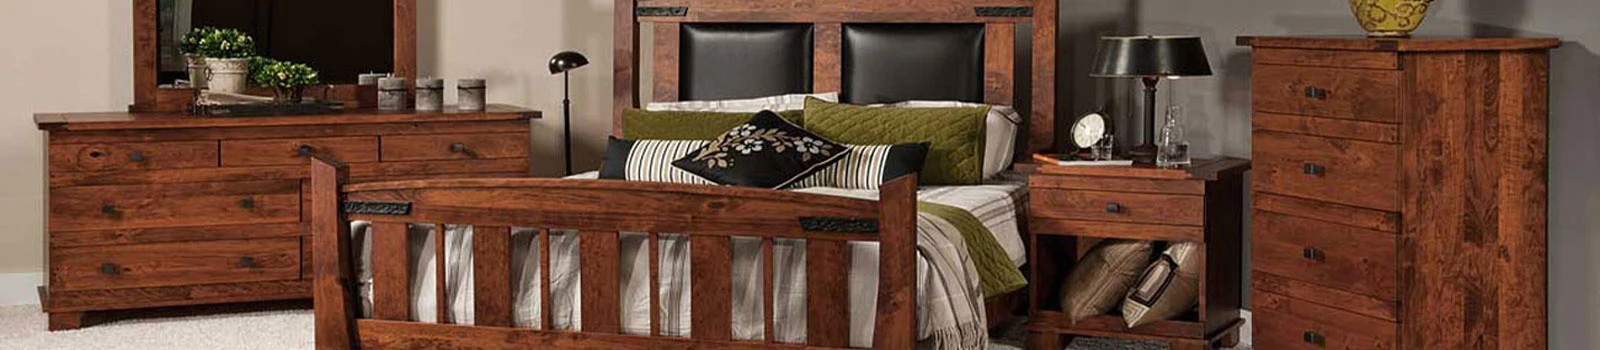 amish bedroom furniture discounted